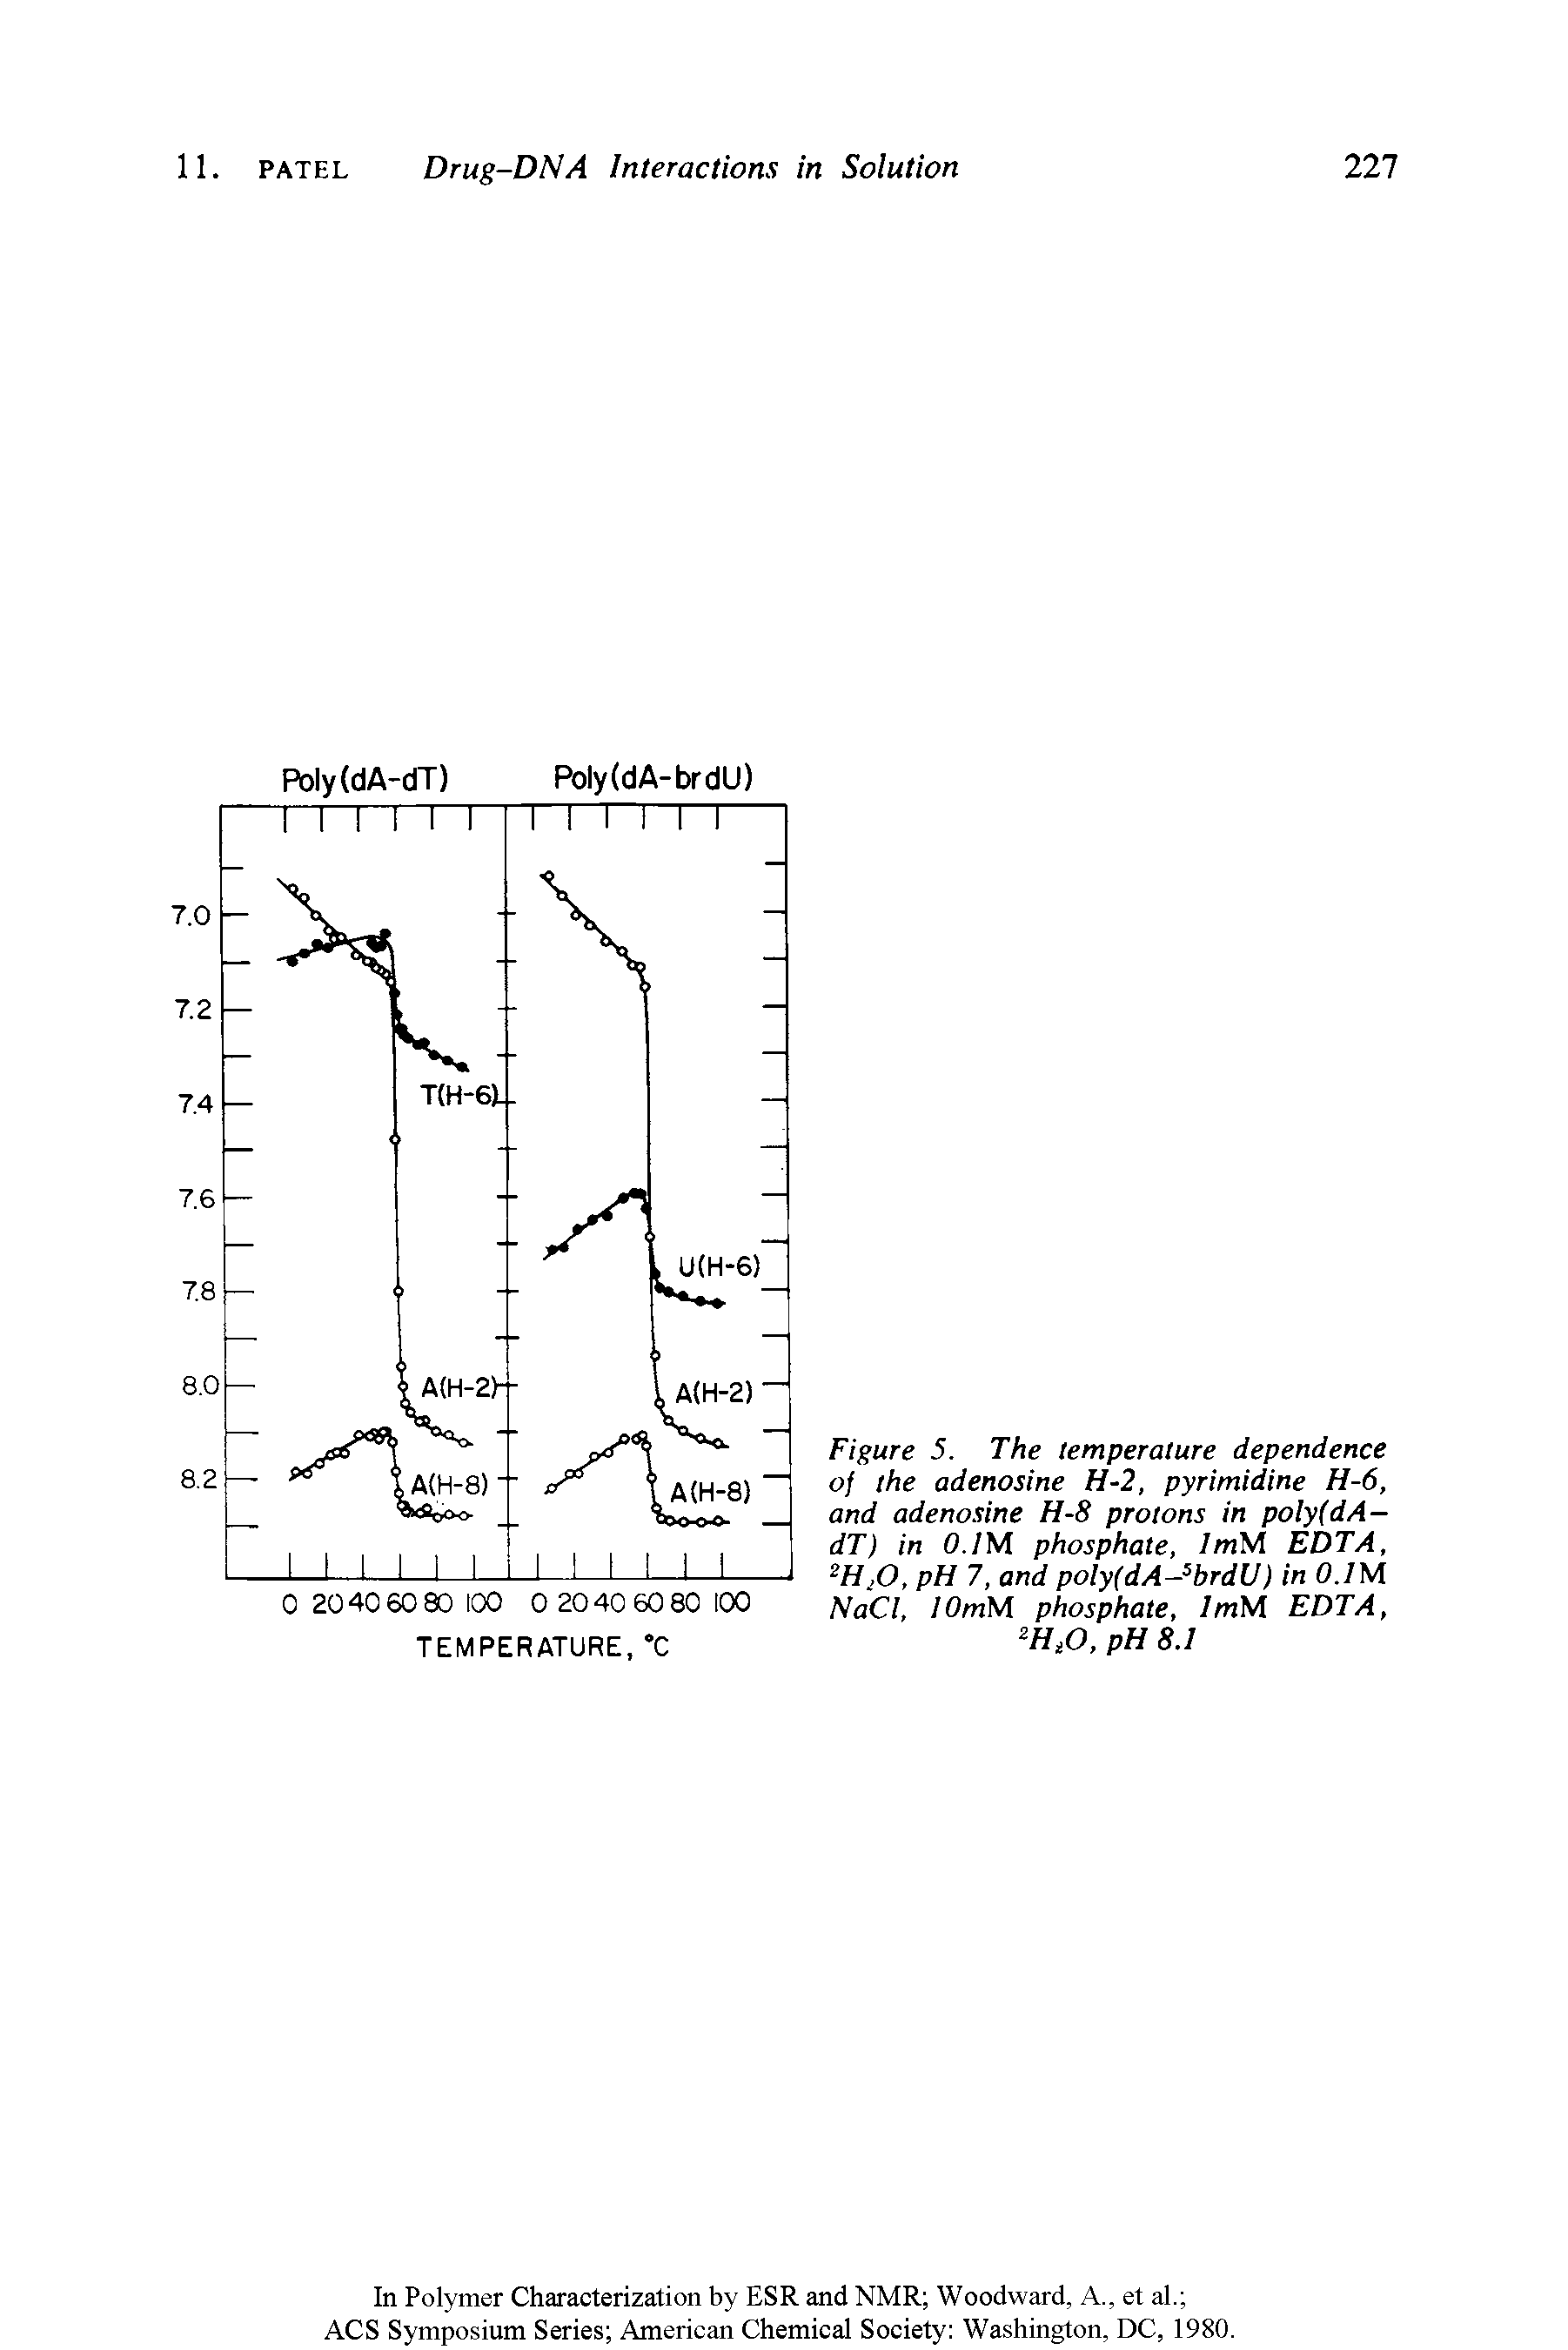 Figure 5. The temperature dependence of the adenosine H-2, pyrimidine H-6, and adenosine H-8 protons in polyfdA-dT) in 0.1 M phosphate, ImM EDTA, 2H10, pH 7, and poly(dA-5brdU) in 0.1 M NaCl, lOmM phosphate, ImM EDTA, zHiO, pH 8.1...